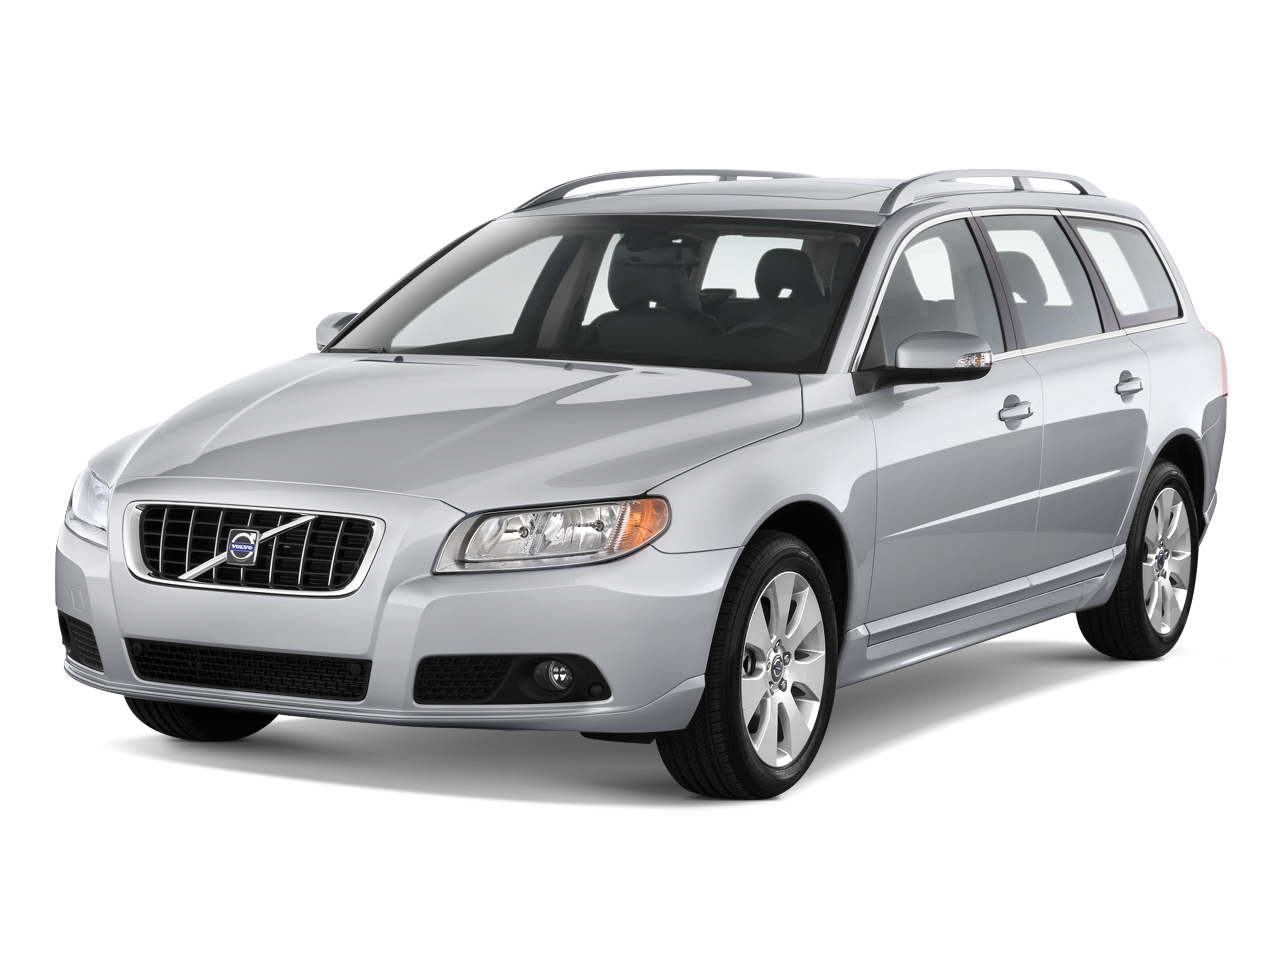 2010 Volvo V70 Prices, Reviews, and Photos - MotorTrend